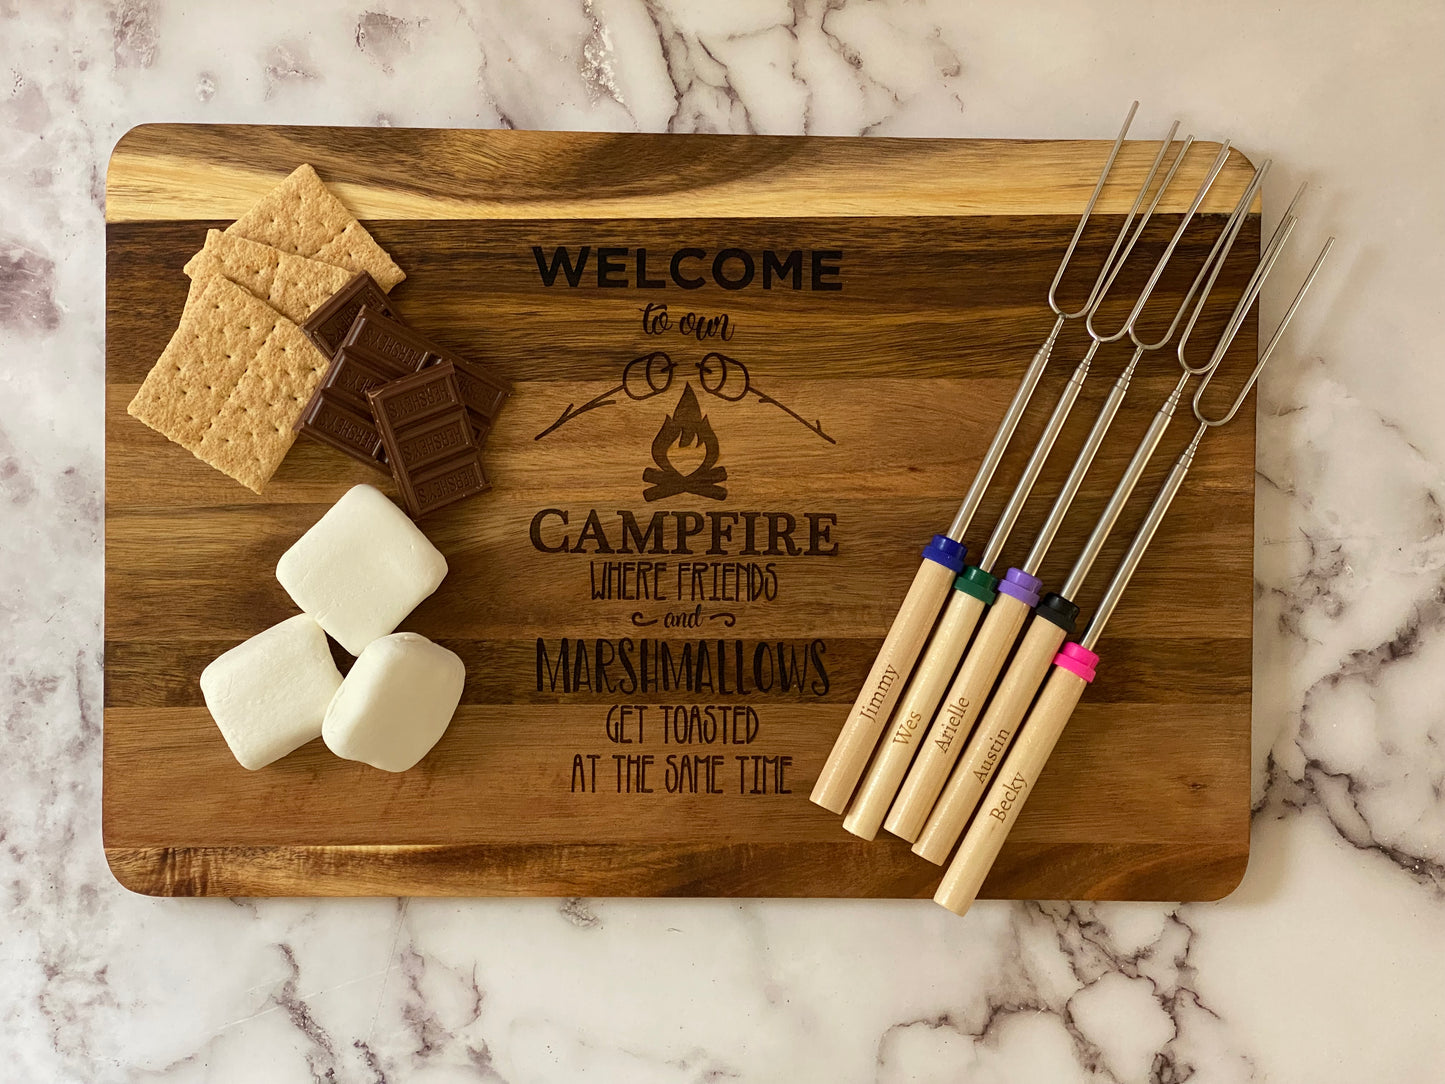 Campfire or Fire pit S'mores Station with 5 personalized telescoping roasting forks